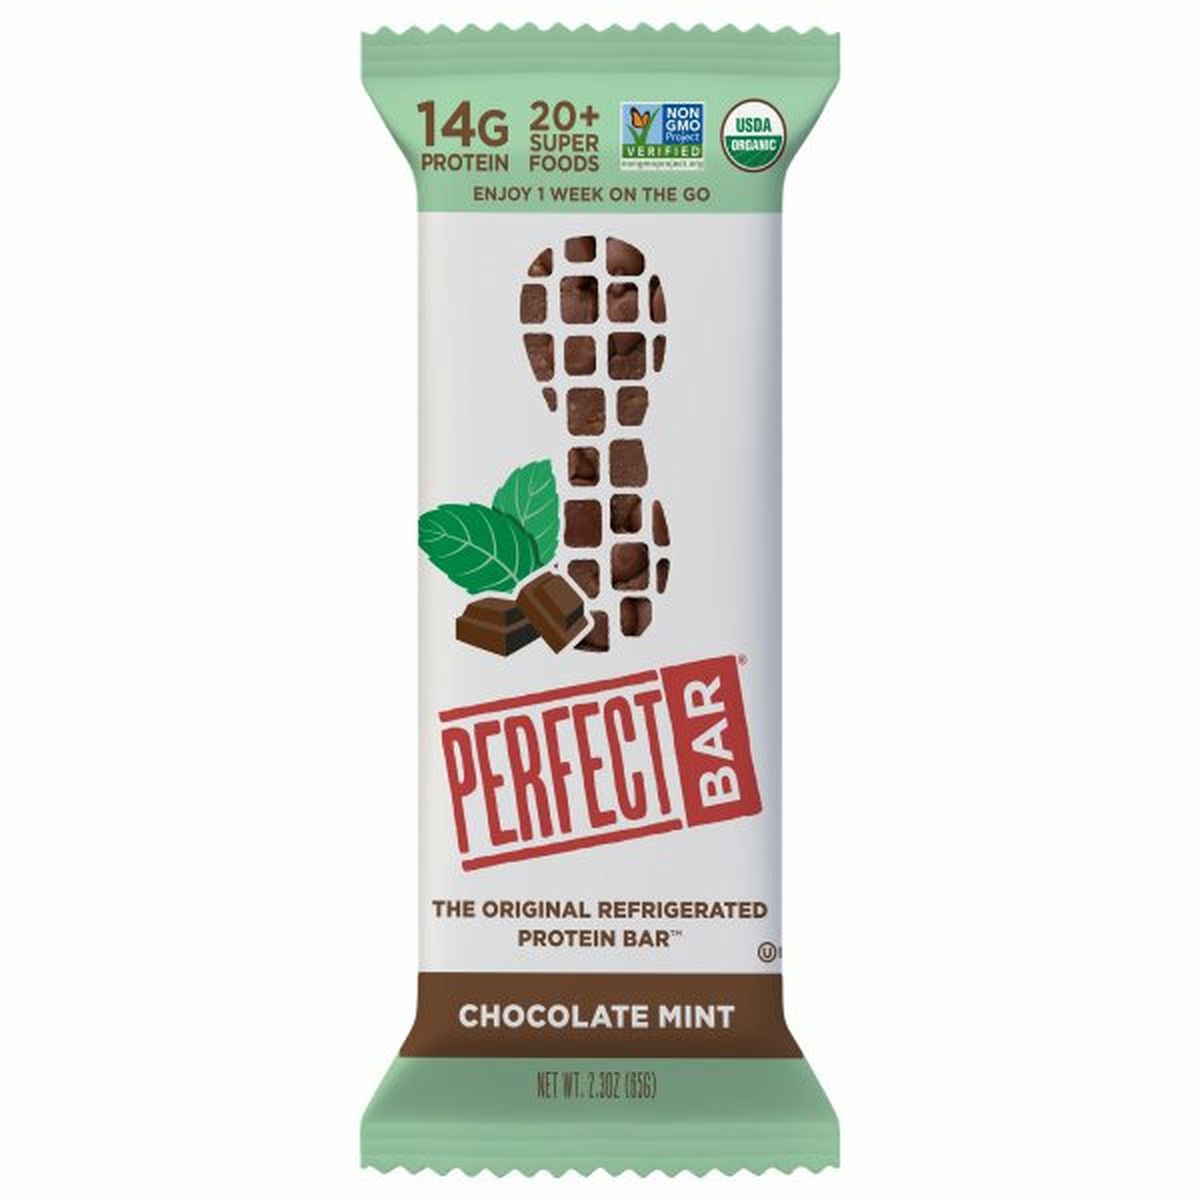 Calories in Perfect Bar Protein Bar, Chocolate Mint